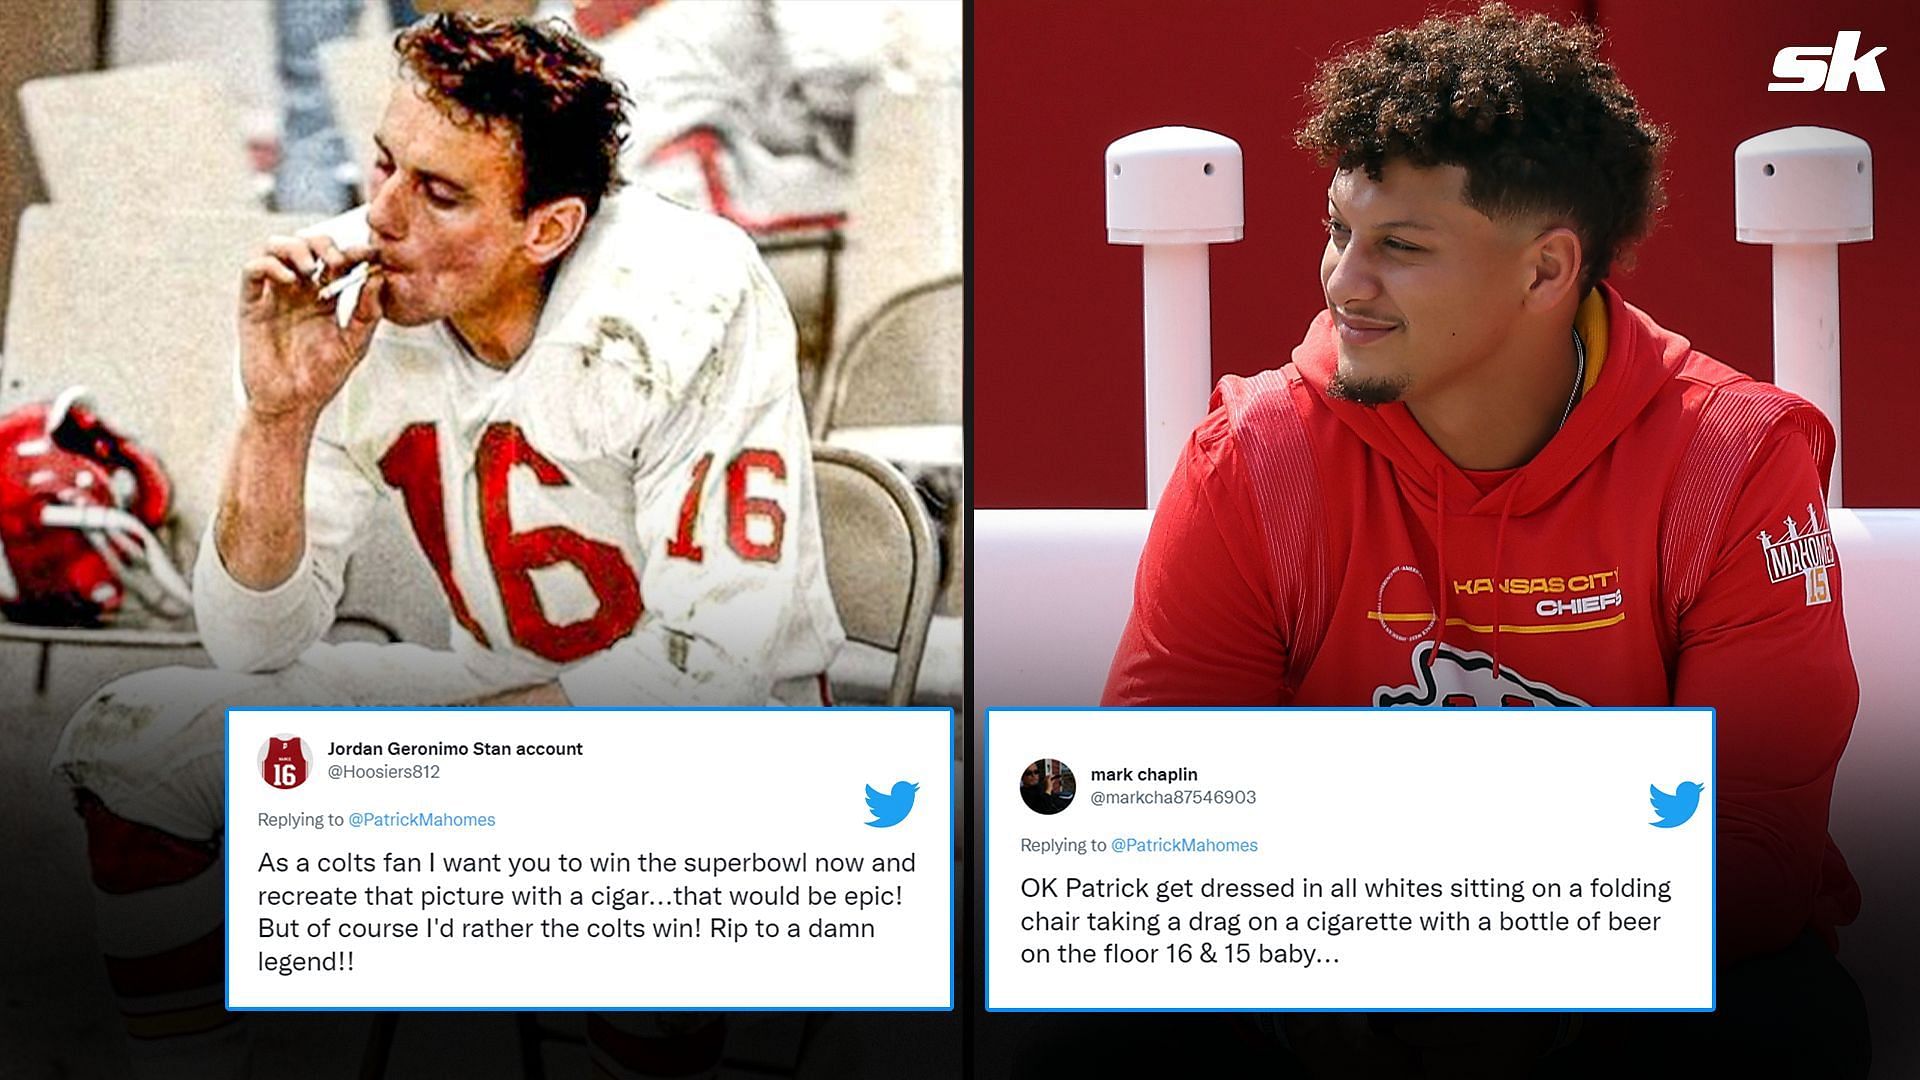 Patrick Mahomes' Brother Receives Savage Clapback From Restaurant He Dissed  - Wtf Article